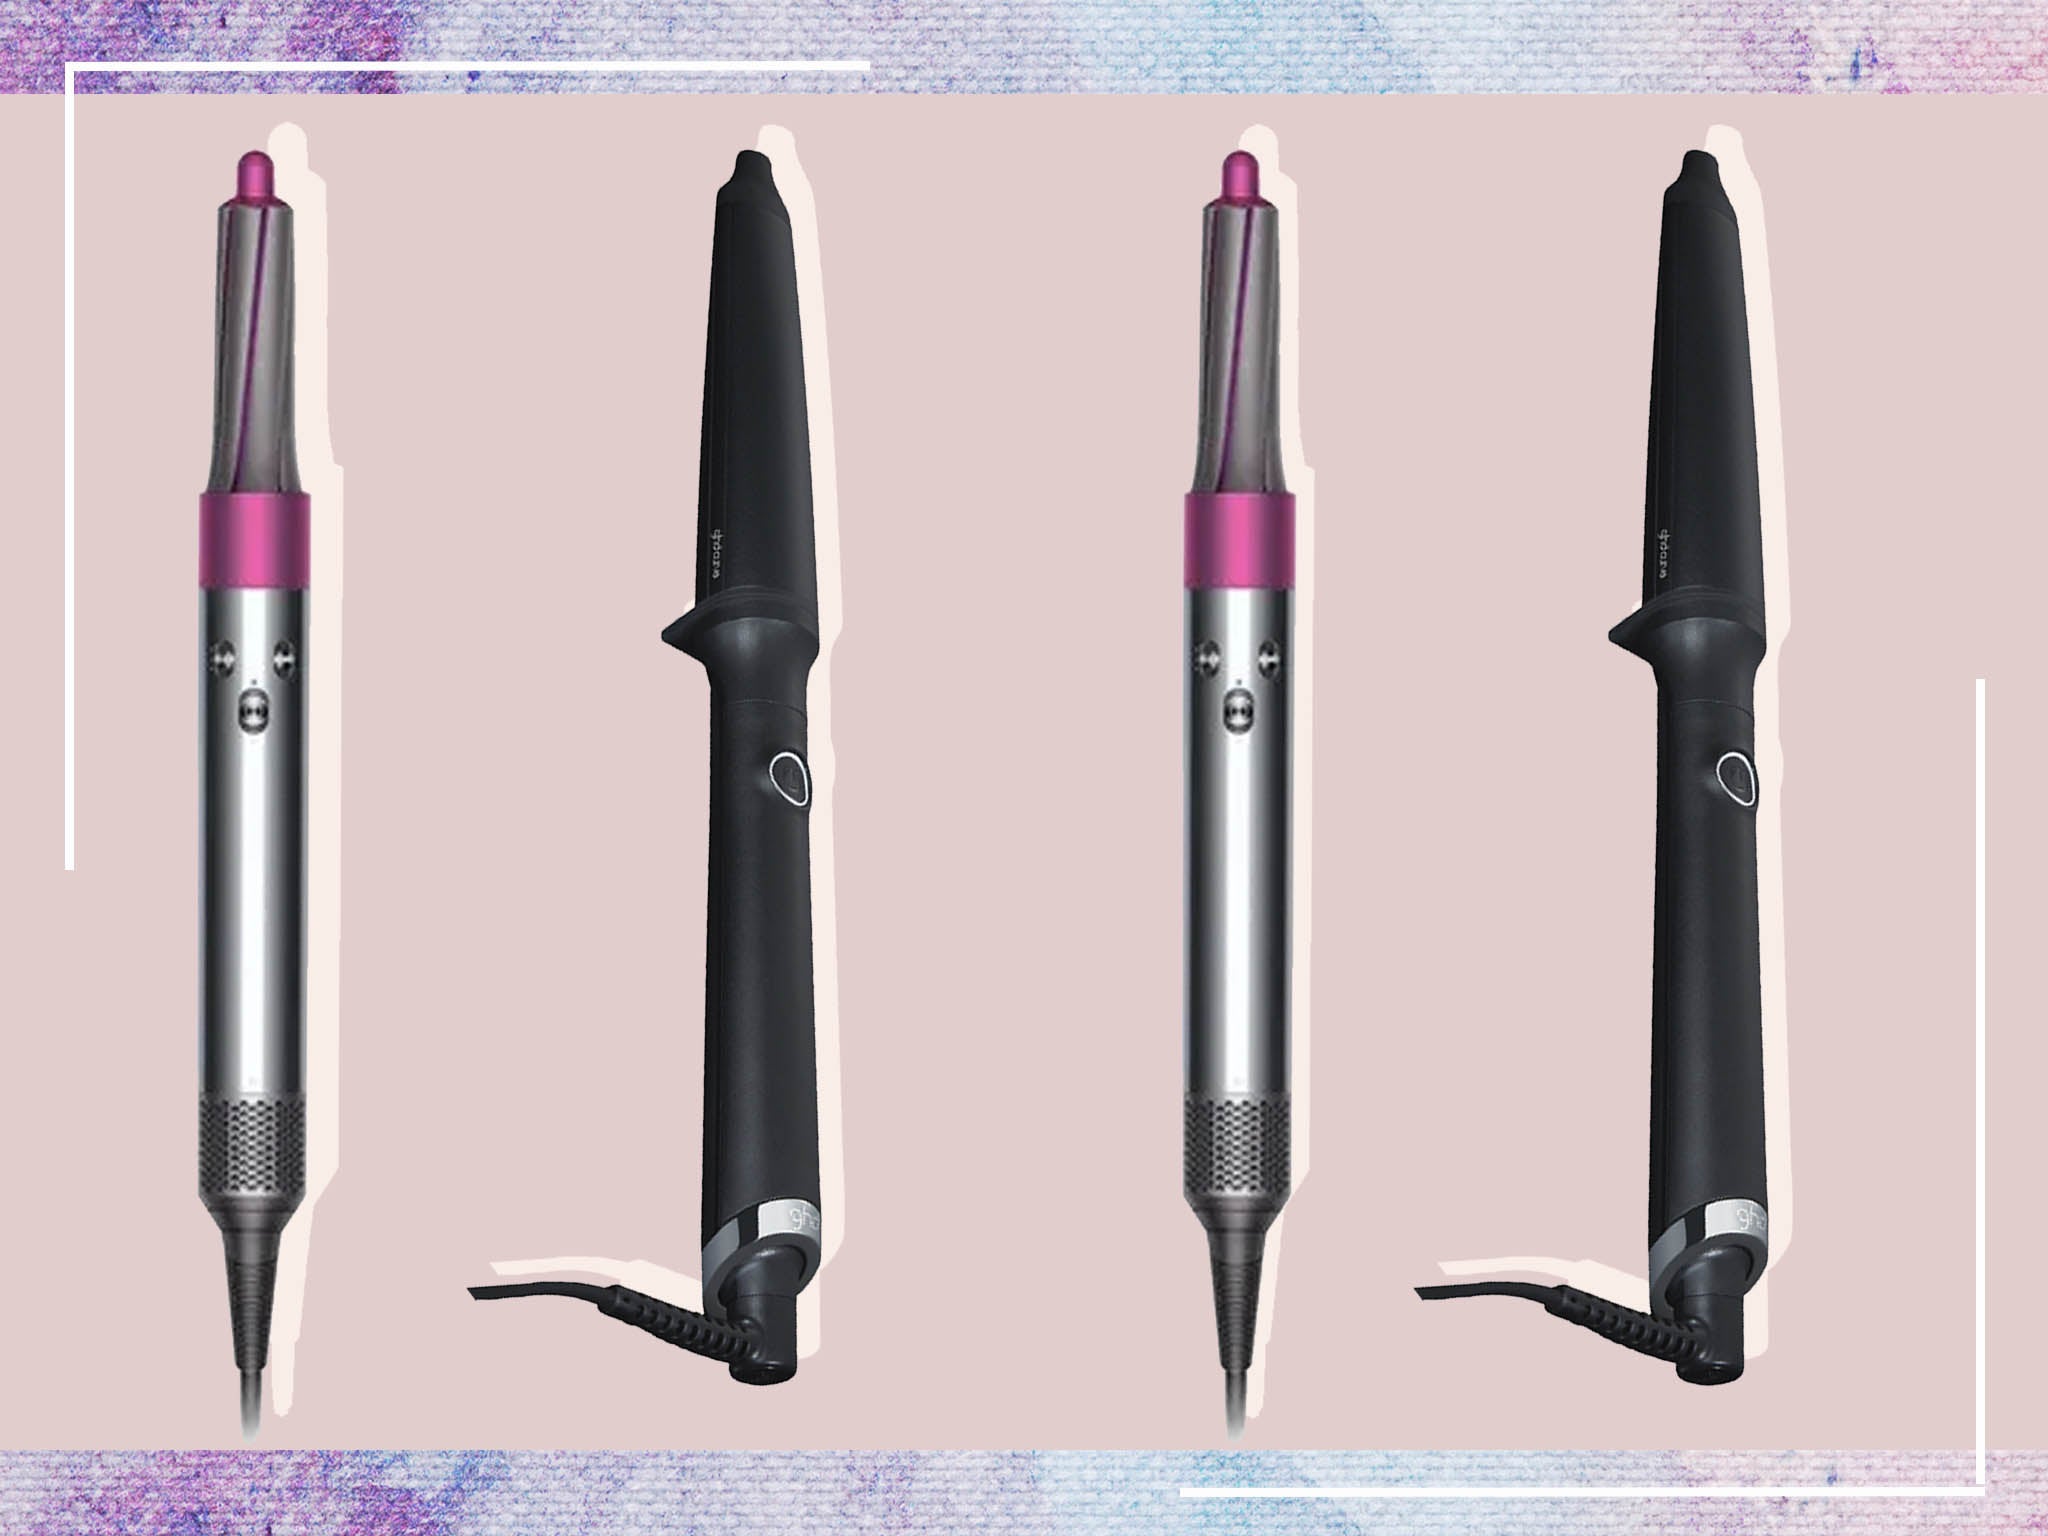 Dyson air wrap vs ghd creative curl wand review: Which is best? | The  Independent